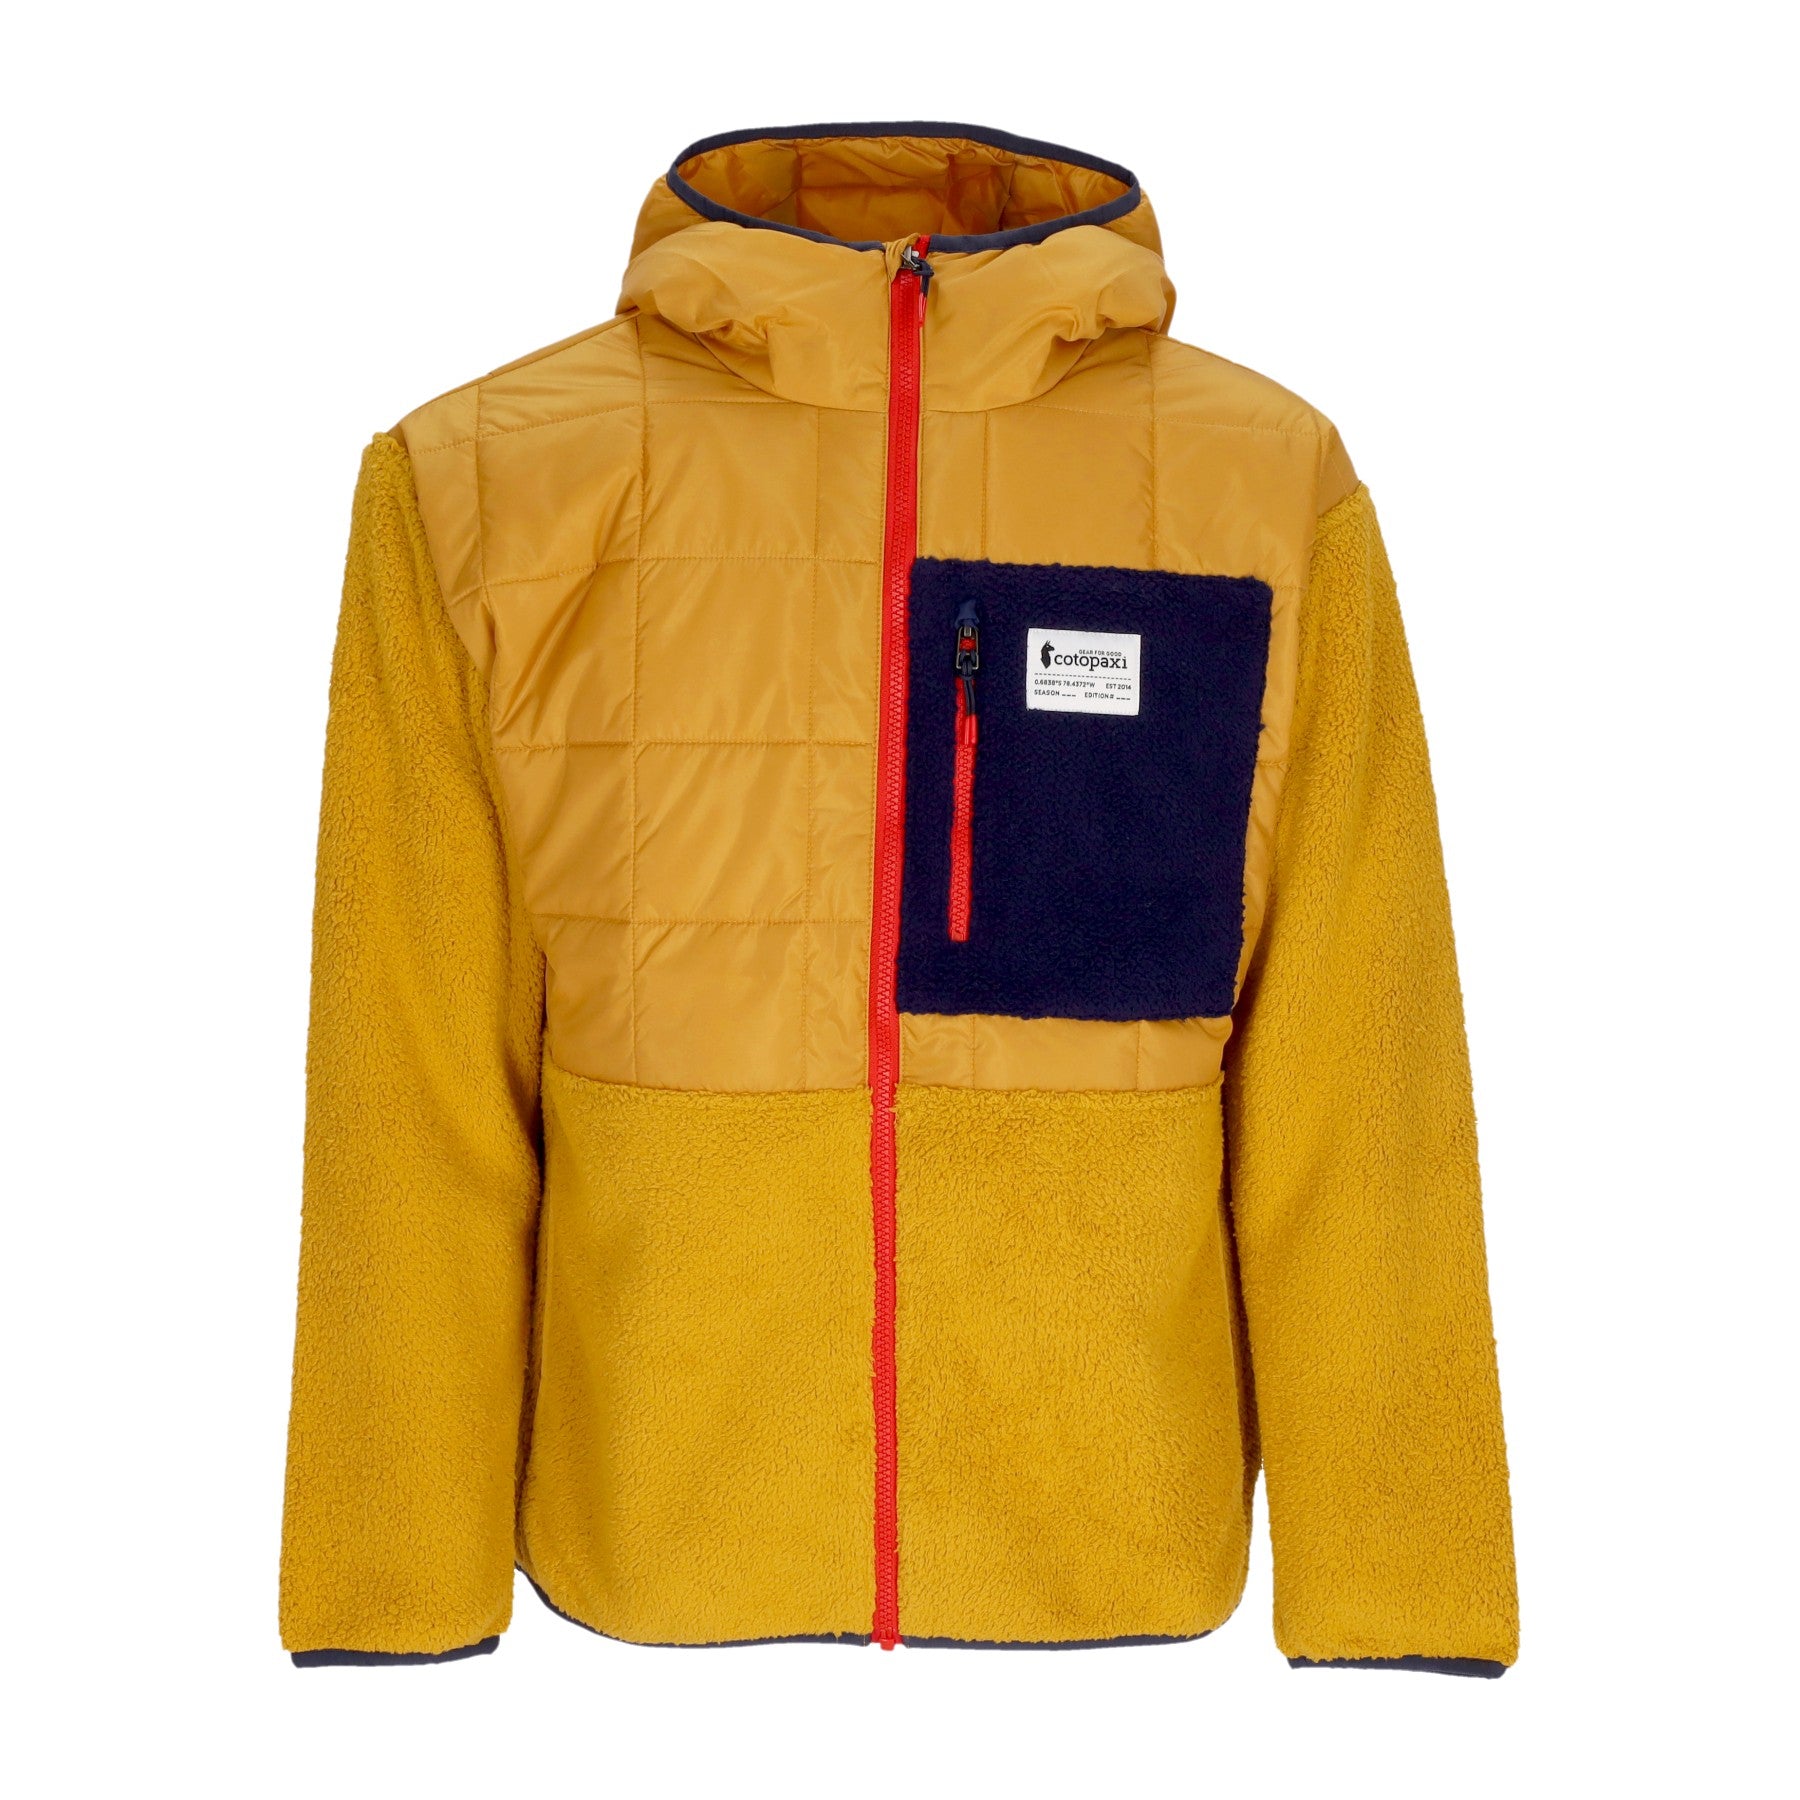 Cotopaxi, Orsetto Uomo Trico Hybrid Hooded Jacket, Amber/amber